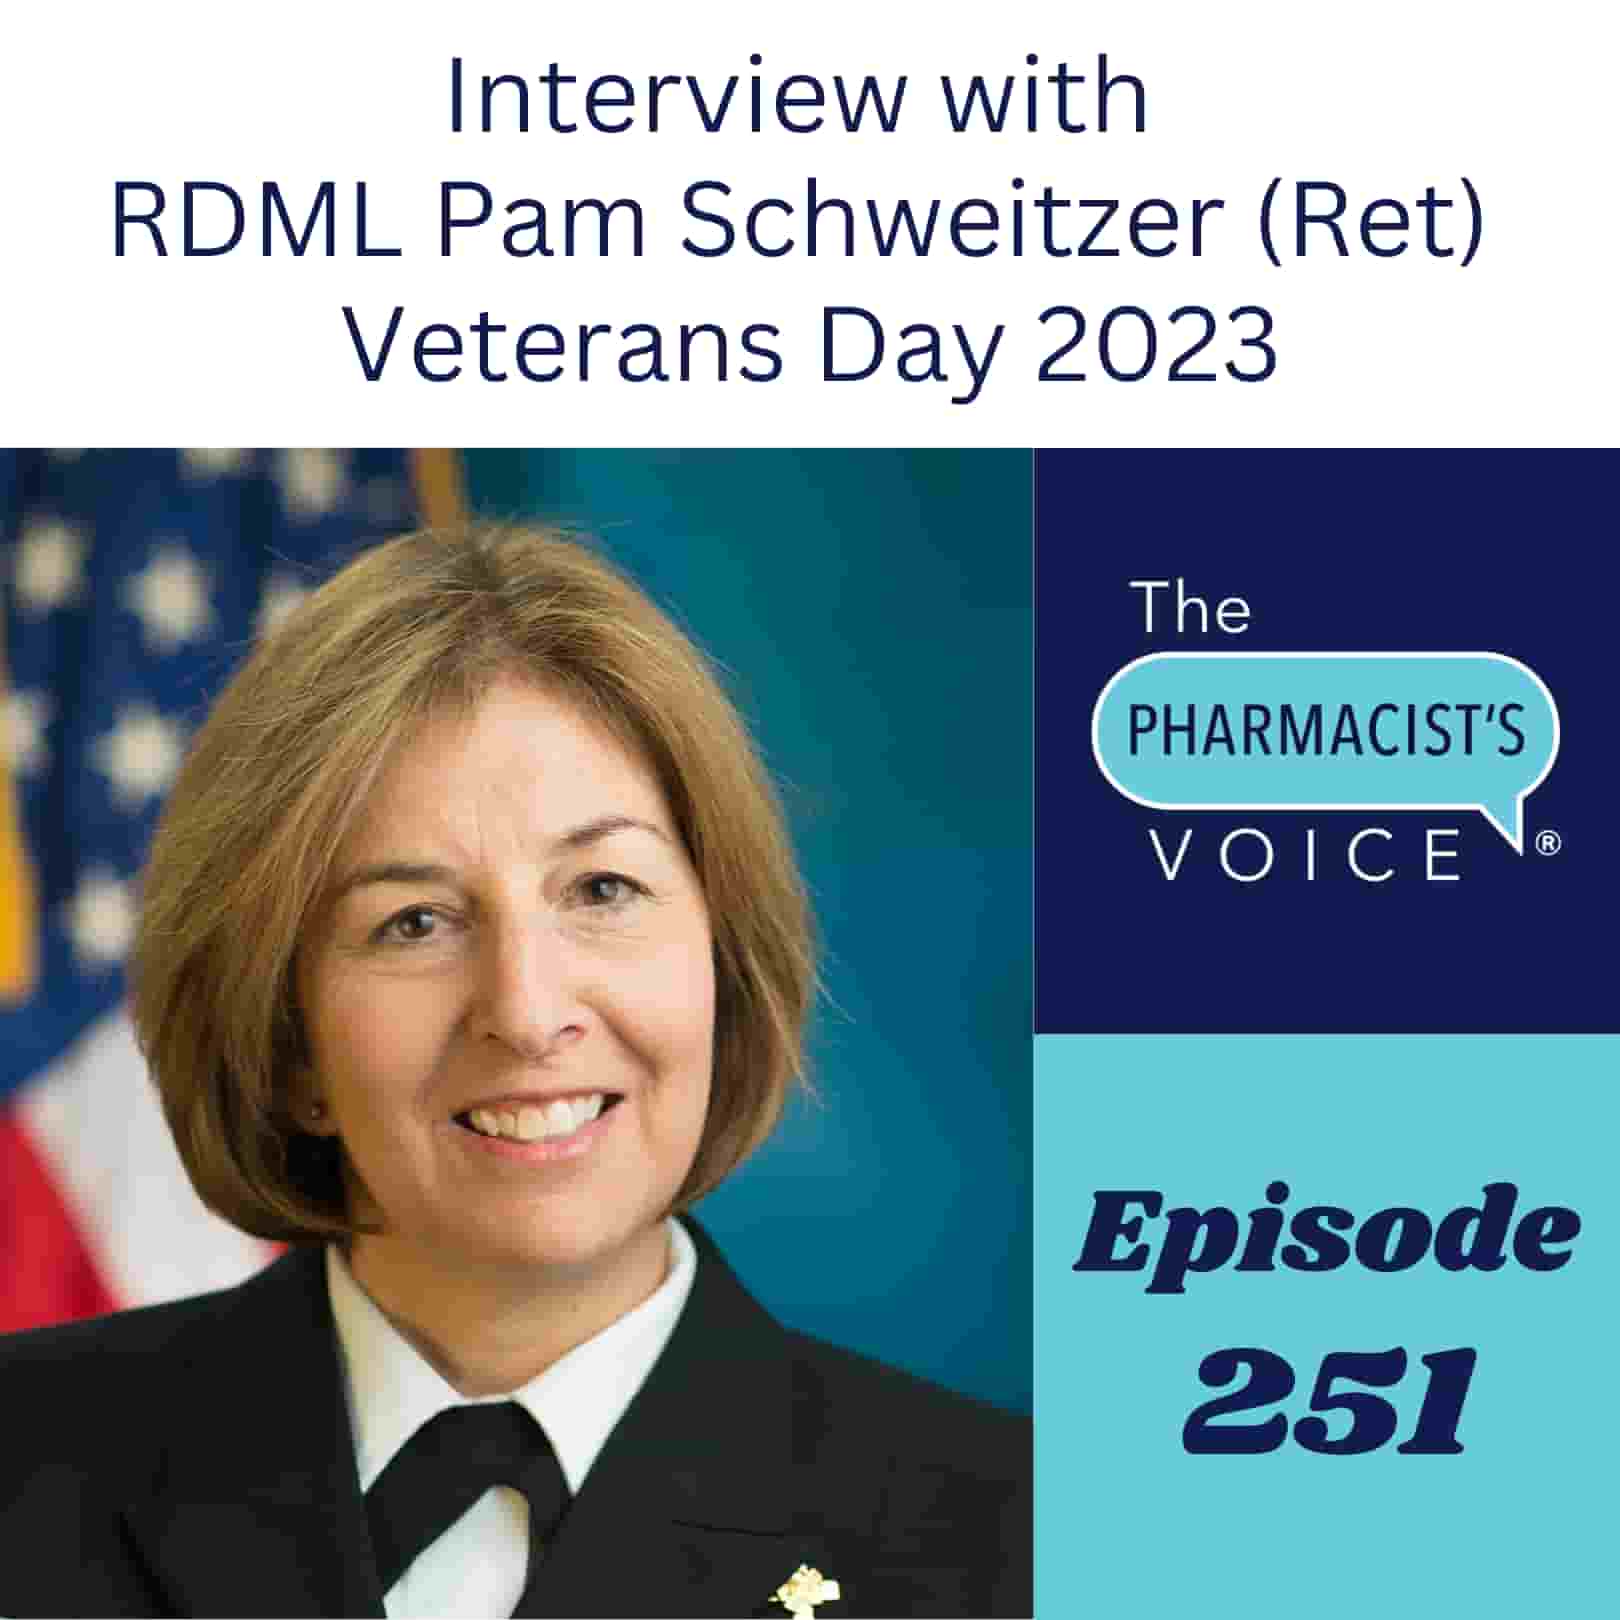 The Pharmacist's Voice Podcast Episode 251. Interview with RDML Pam Schweitzer, PharmD (Ret).